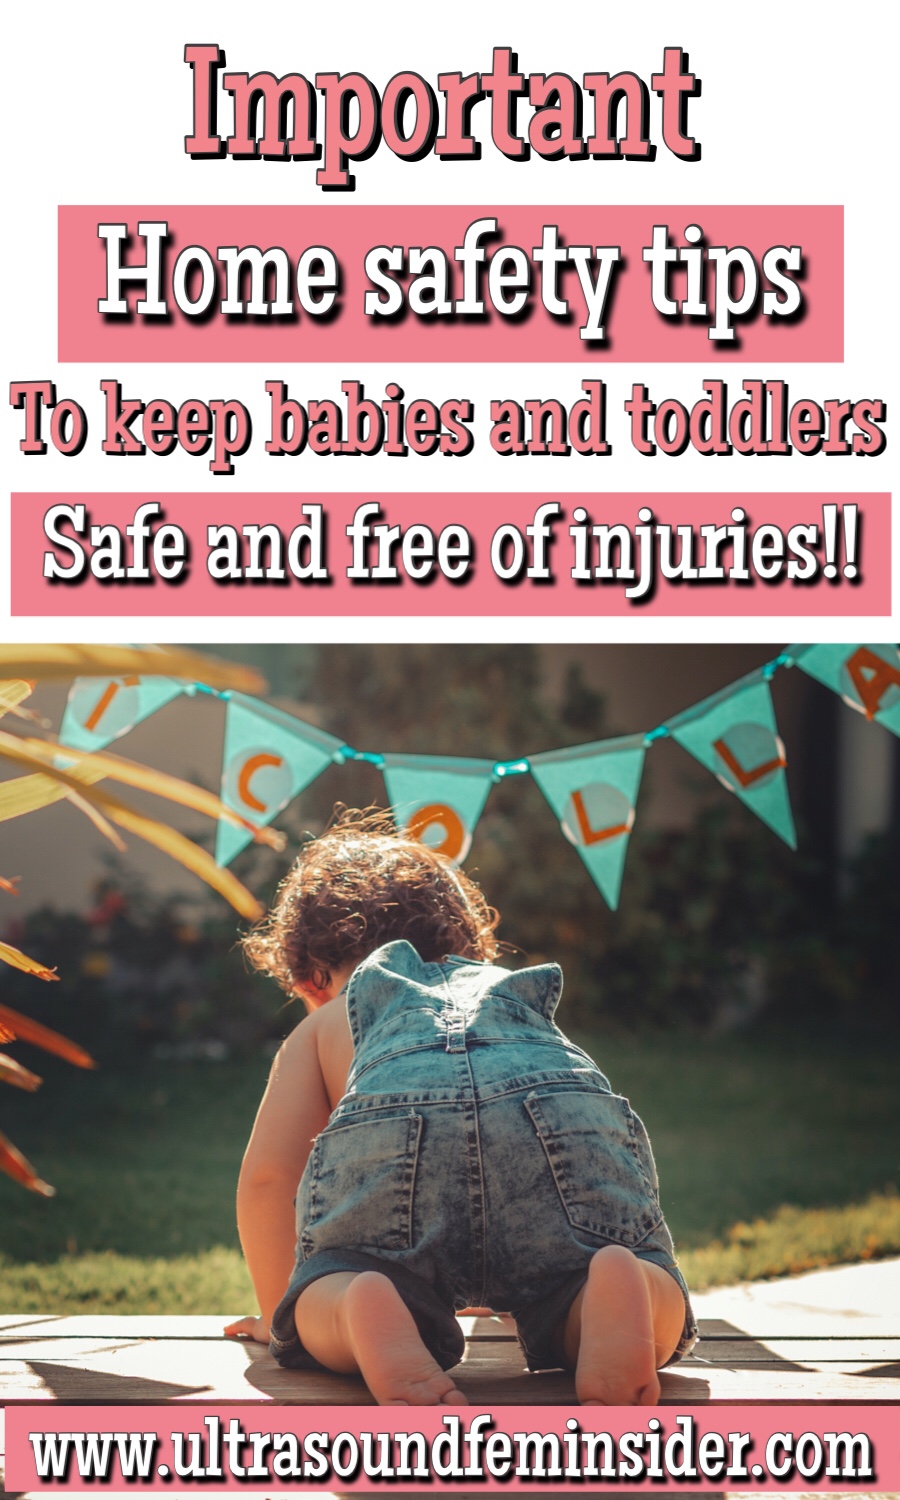 Important home safety tips for babies.